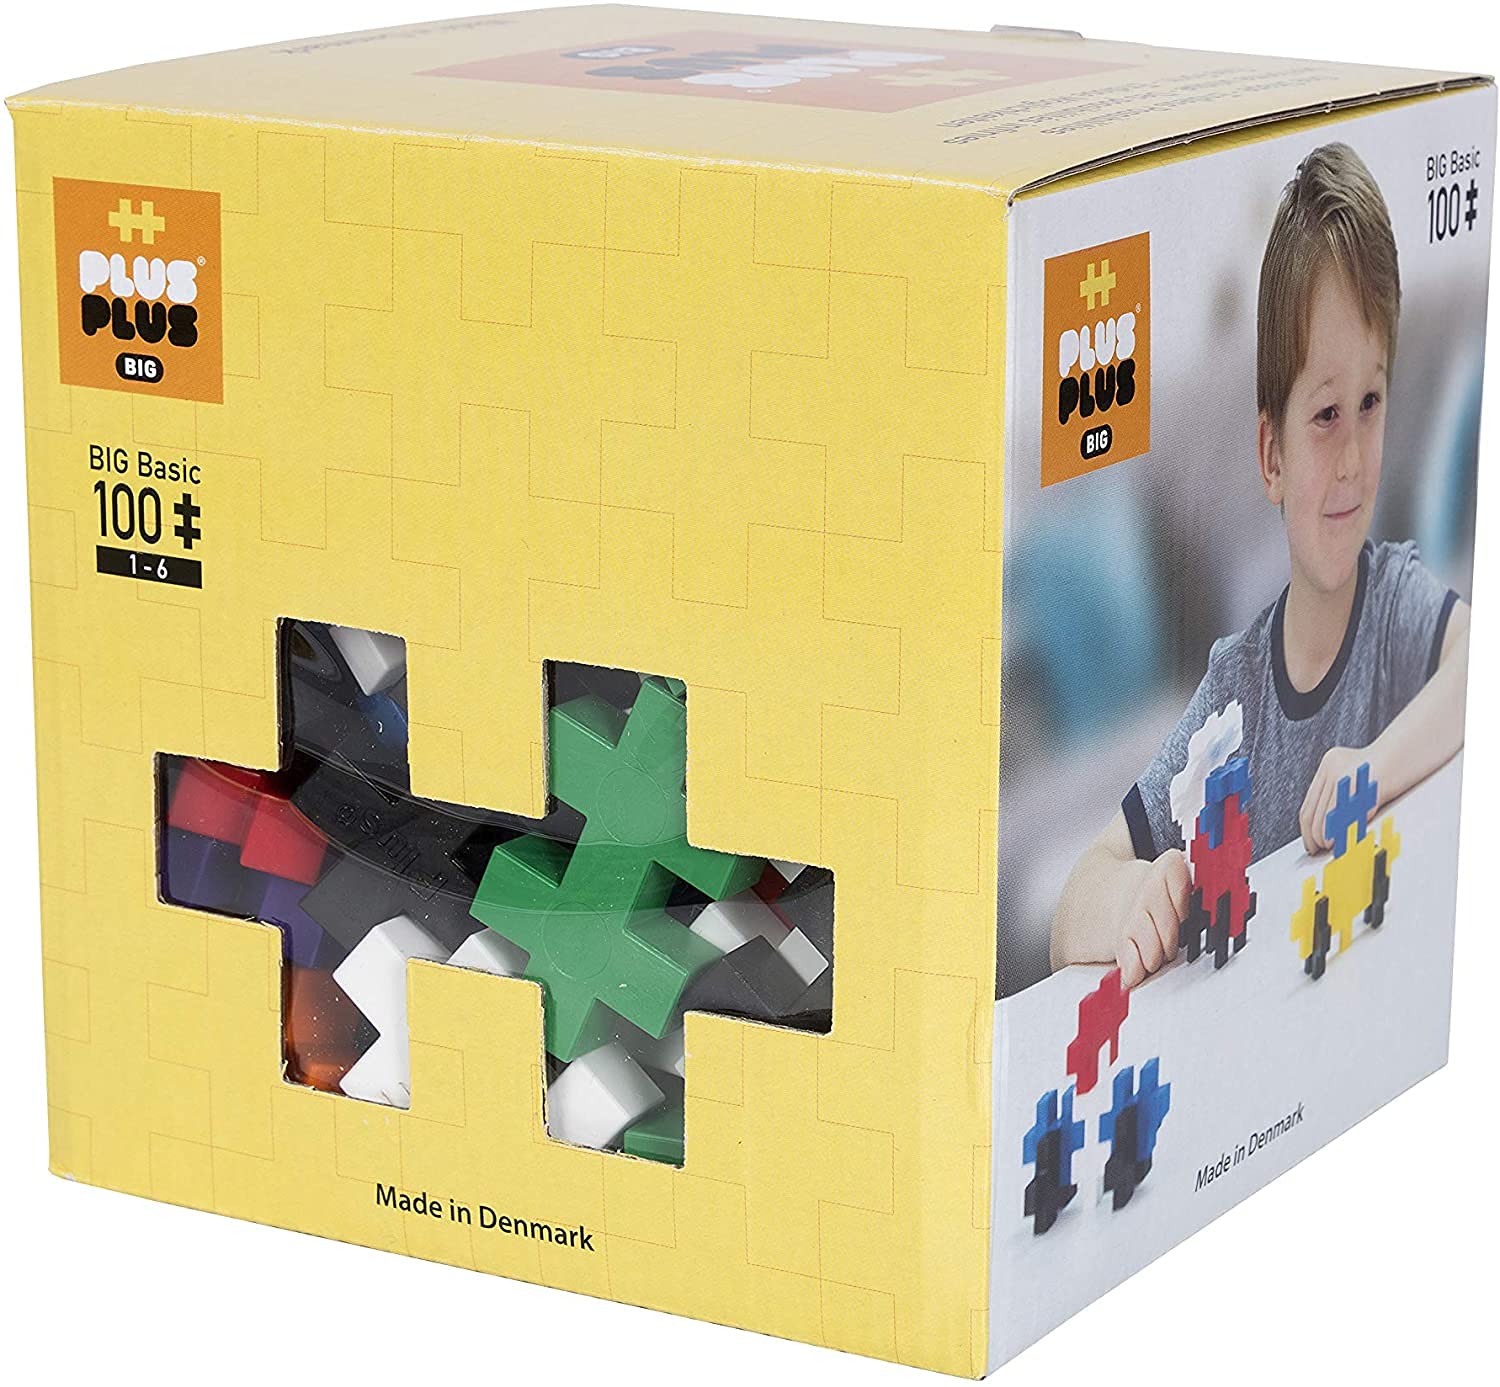 PLUS PLUS BIG - Open Play Set - 100 Piece - Basic Color Mix, Construction Building Stem Toy, Interlocking Large Puzzle Blocks for Toddlers and Preschool